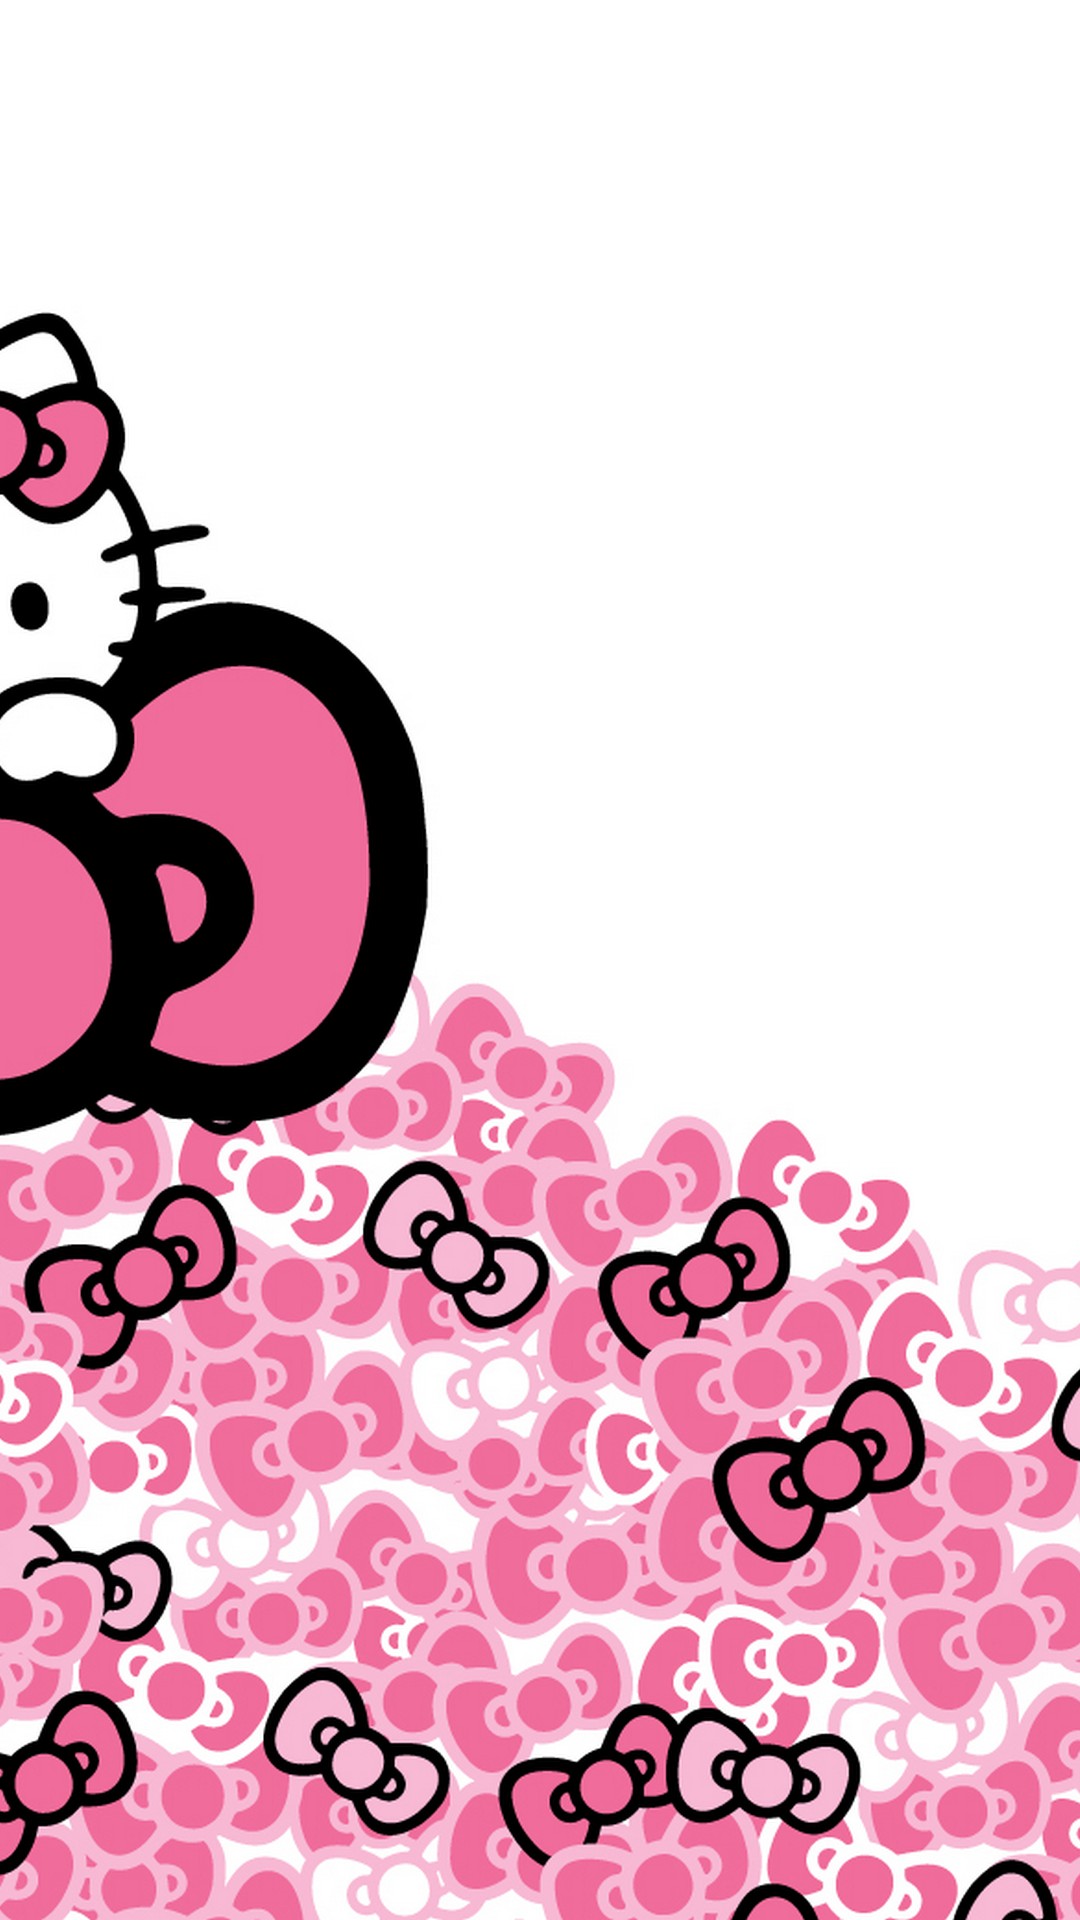 Hello Kitty Pictures Wallpaper Android with image resolution 1080x1920 pixel. You can make this wallpaper for your Android backgrounds, Tablet, Smartphones Screensavers and Mobile Phone Lock Screen